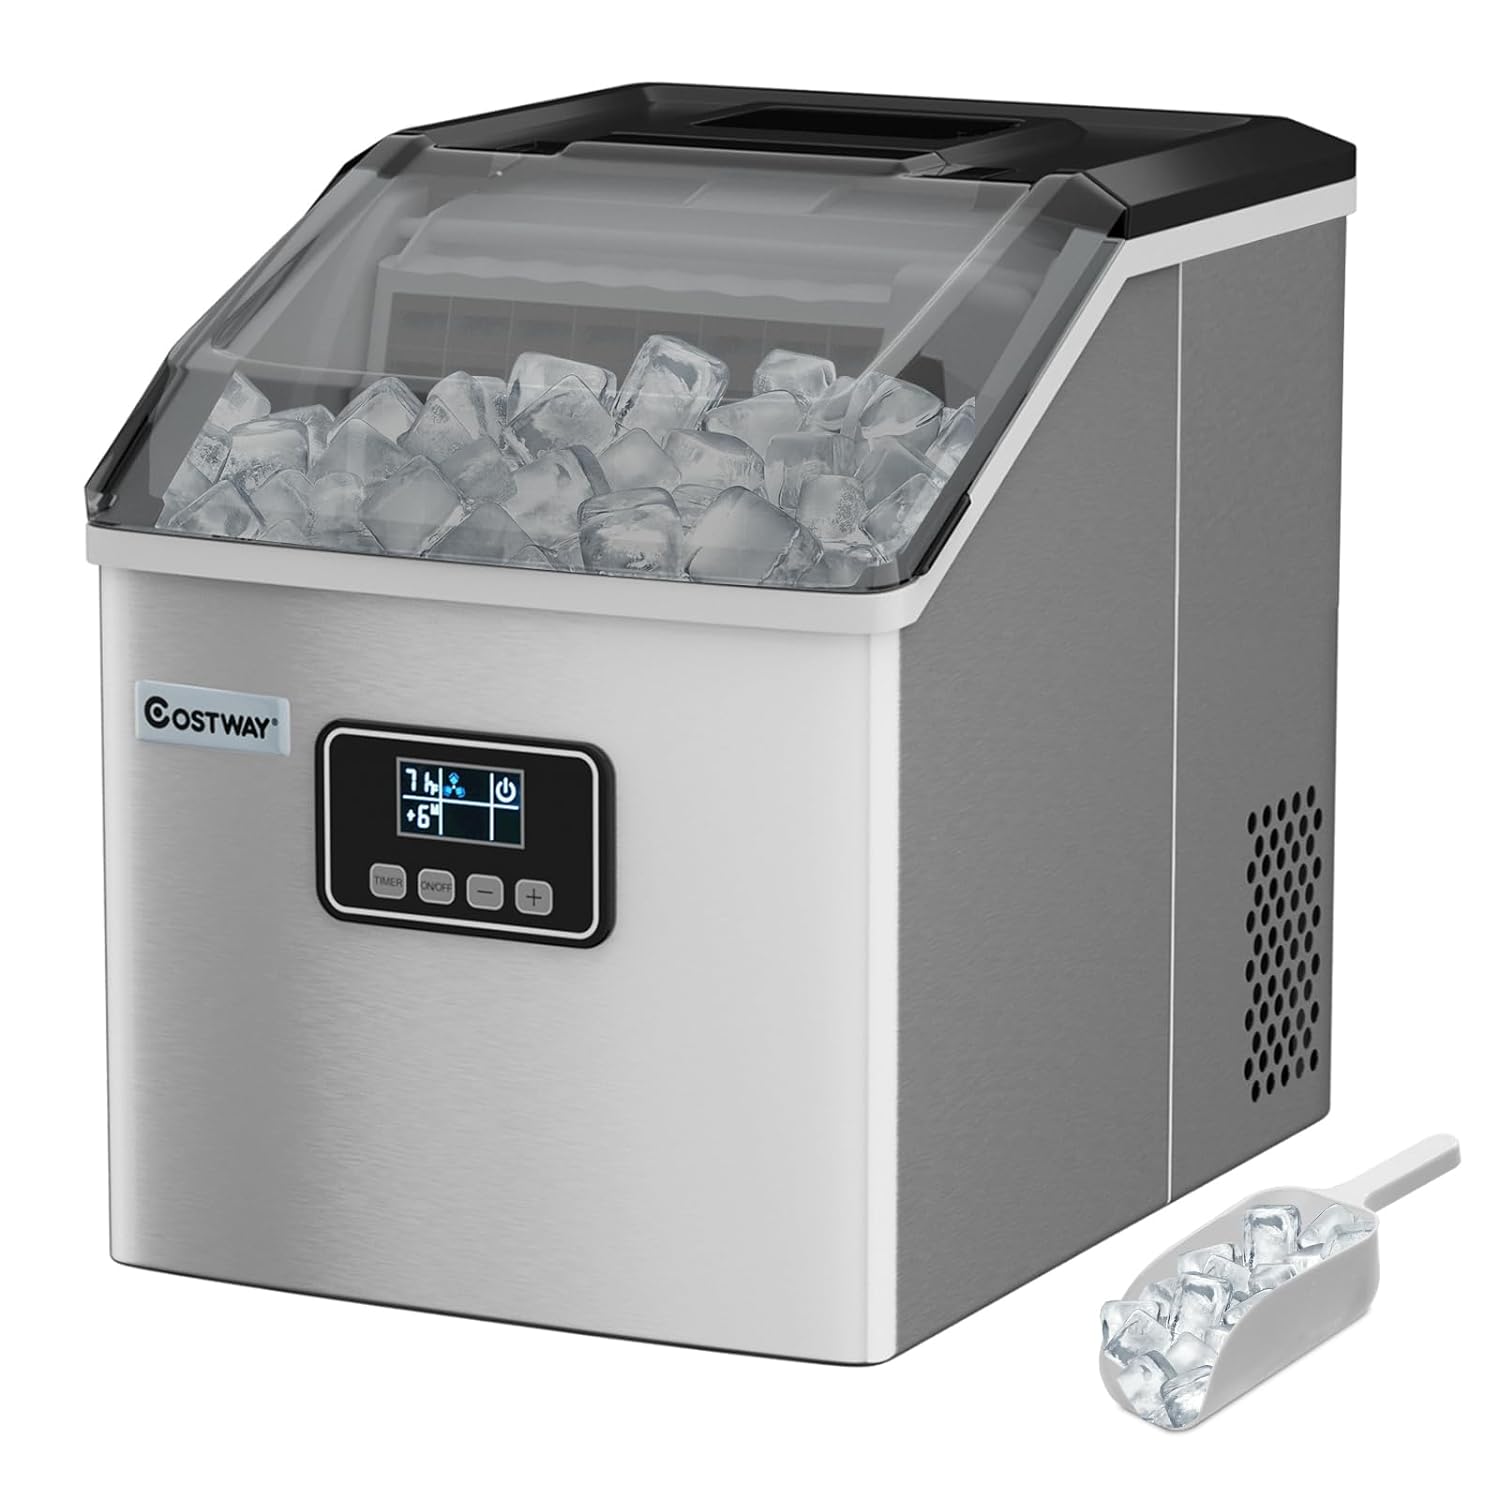 COSTWAY 2.4 L Ice Cube Machine, Ice Maker 22 kg in 24 Hours, Ice Maker 24 Ice Cubes in 15 Minutes, Ice Cube Maker with Scoop/Timer/Self-Cleaning Function